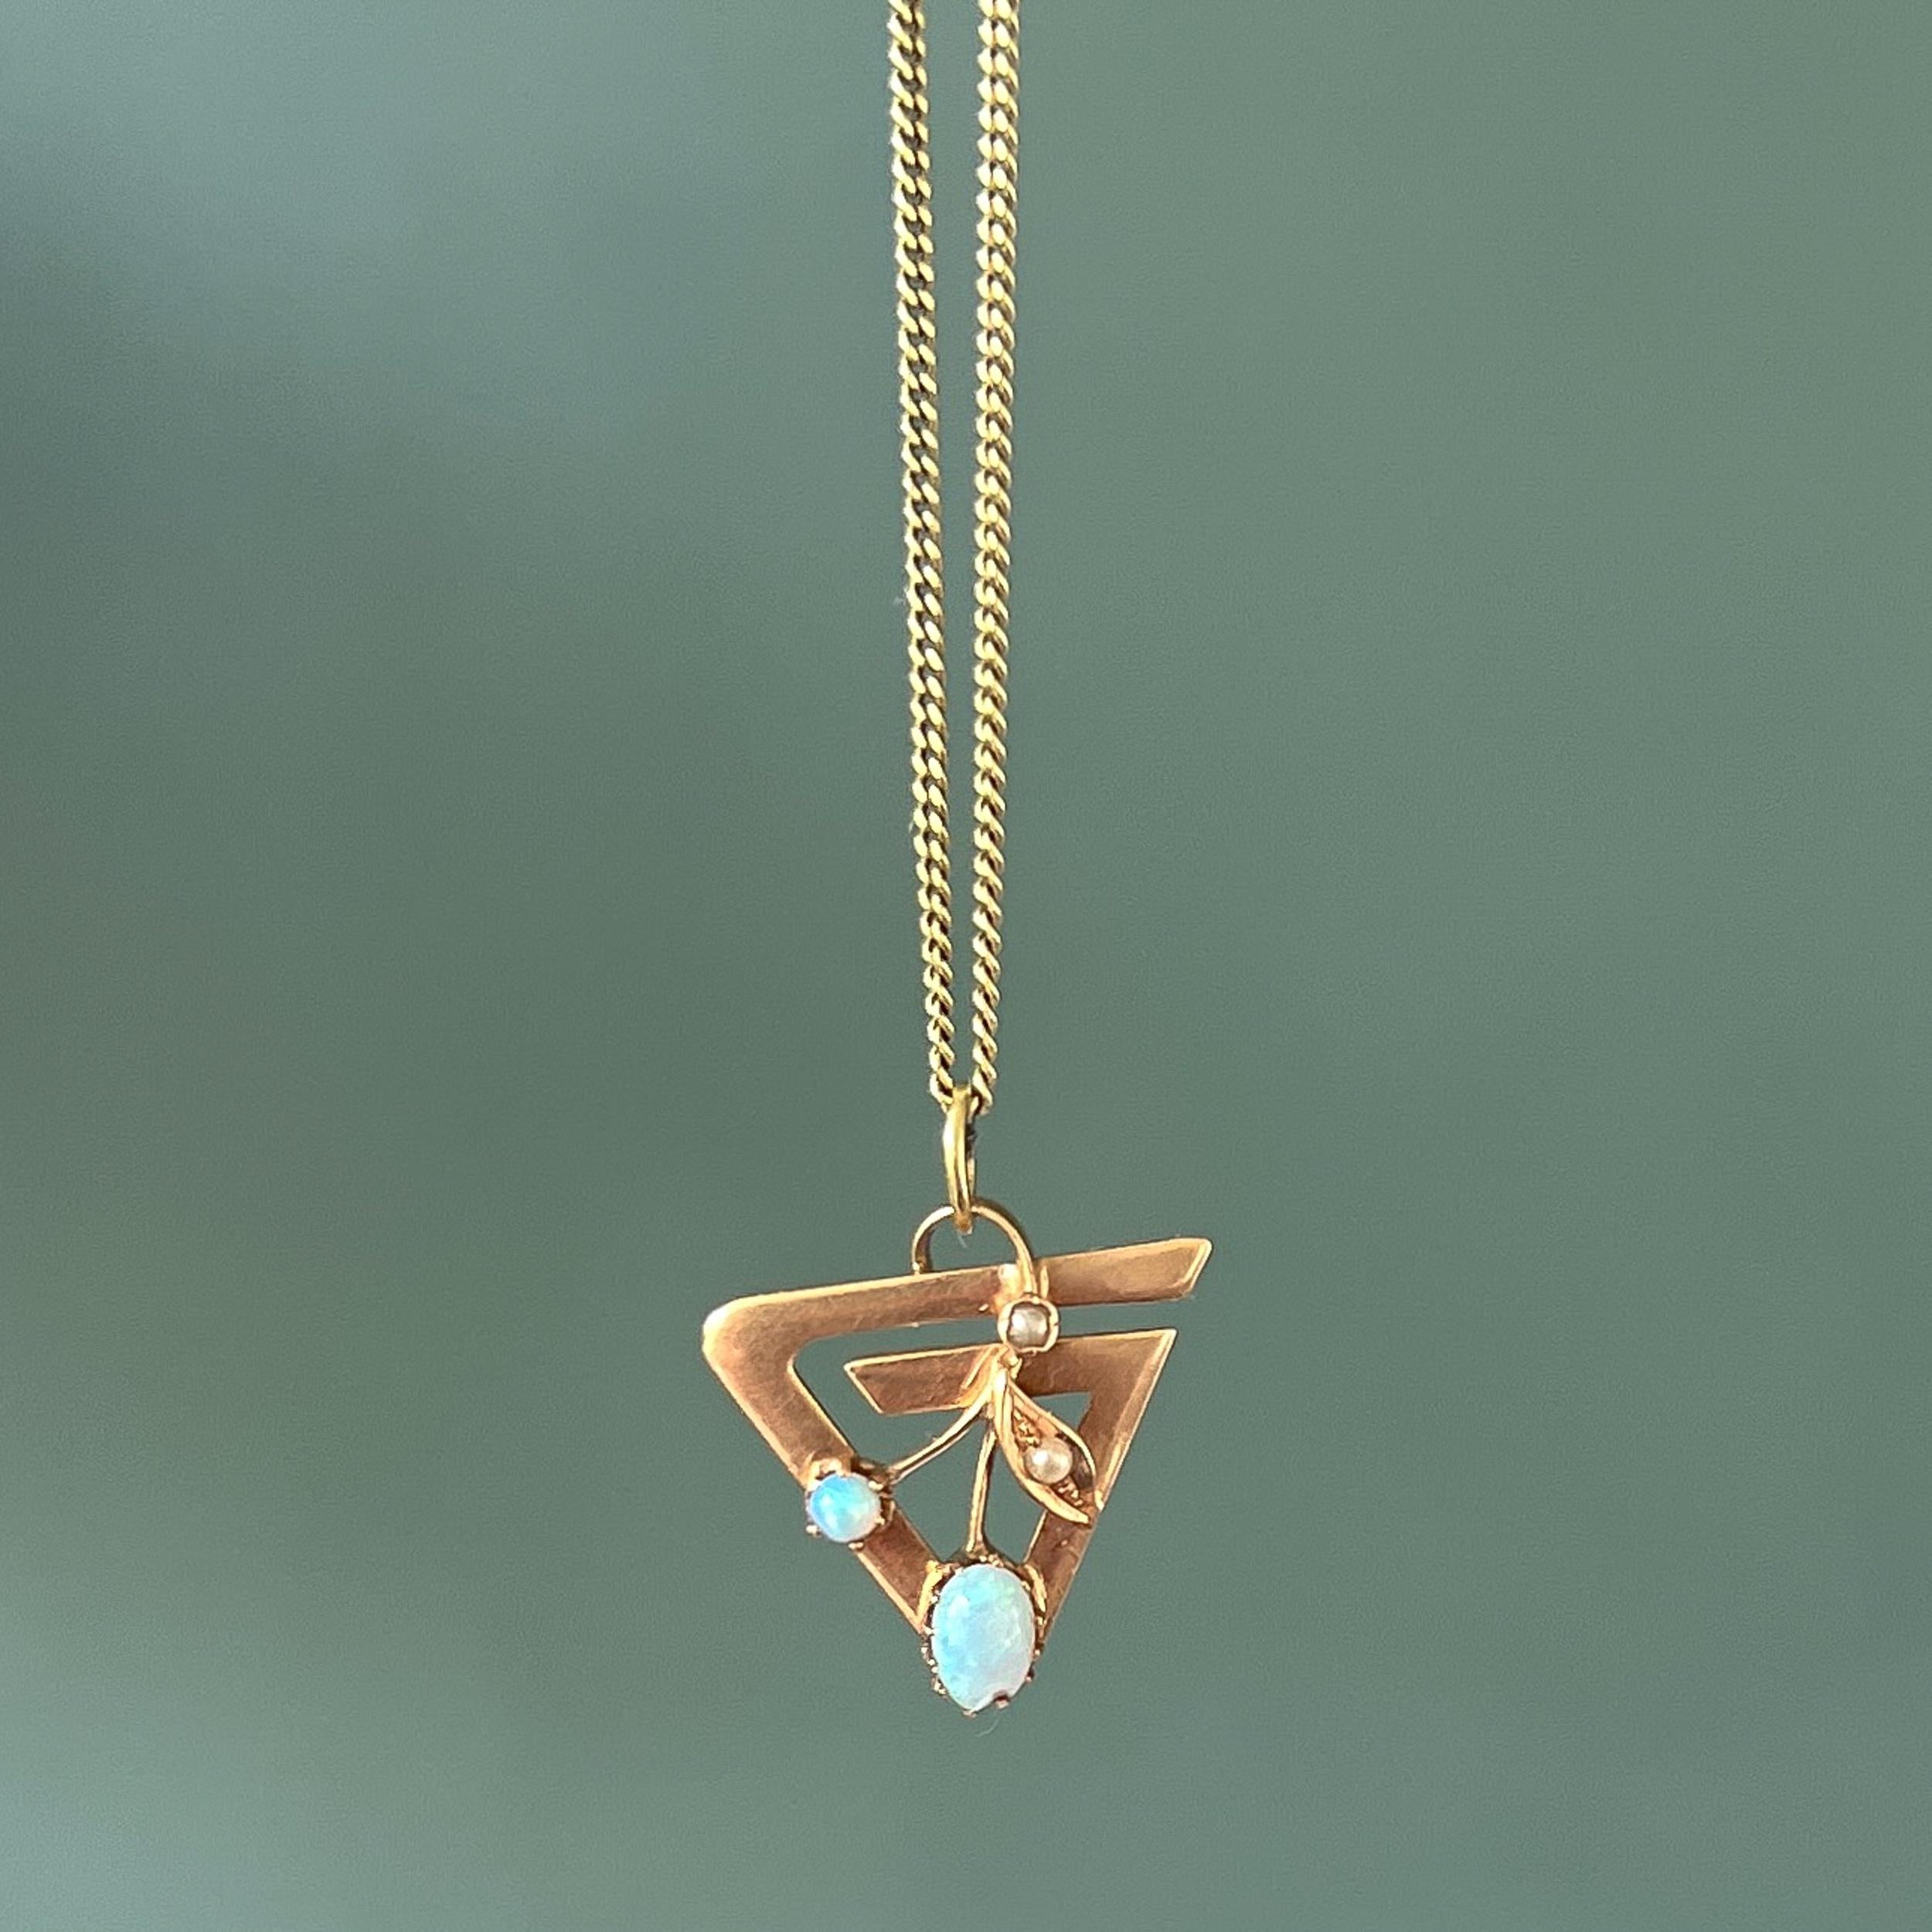 A 14 karat gold opal and seed pearl vintage charm pendant. This preloved charm has a floral leaf design set with two tiny seed pearls and two beautiful white opals. The frame is modelled into a triangle. 

For centuries, opals were believed to bring